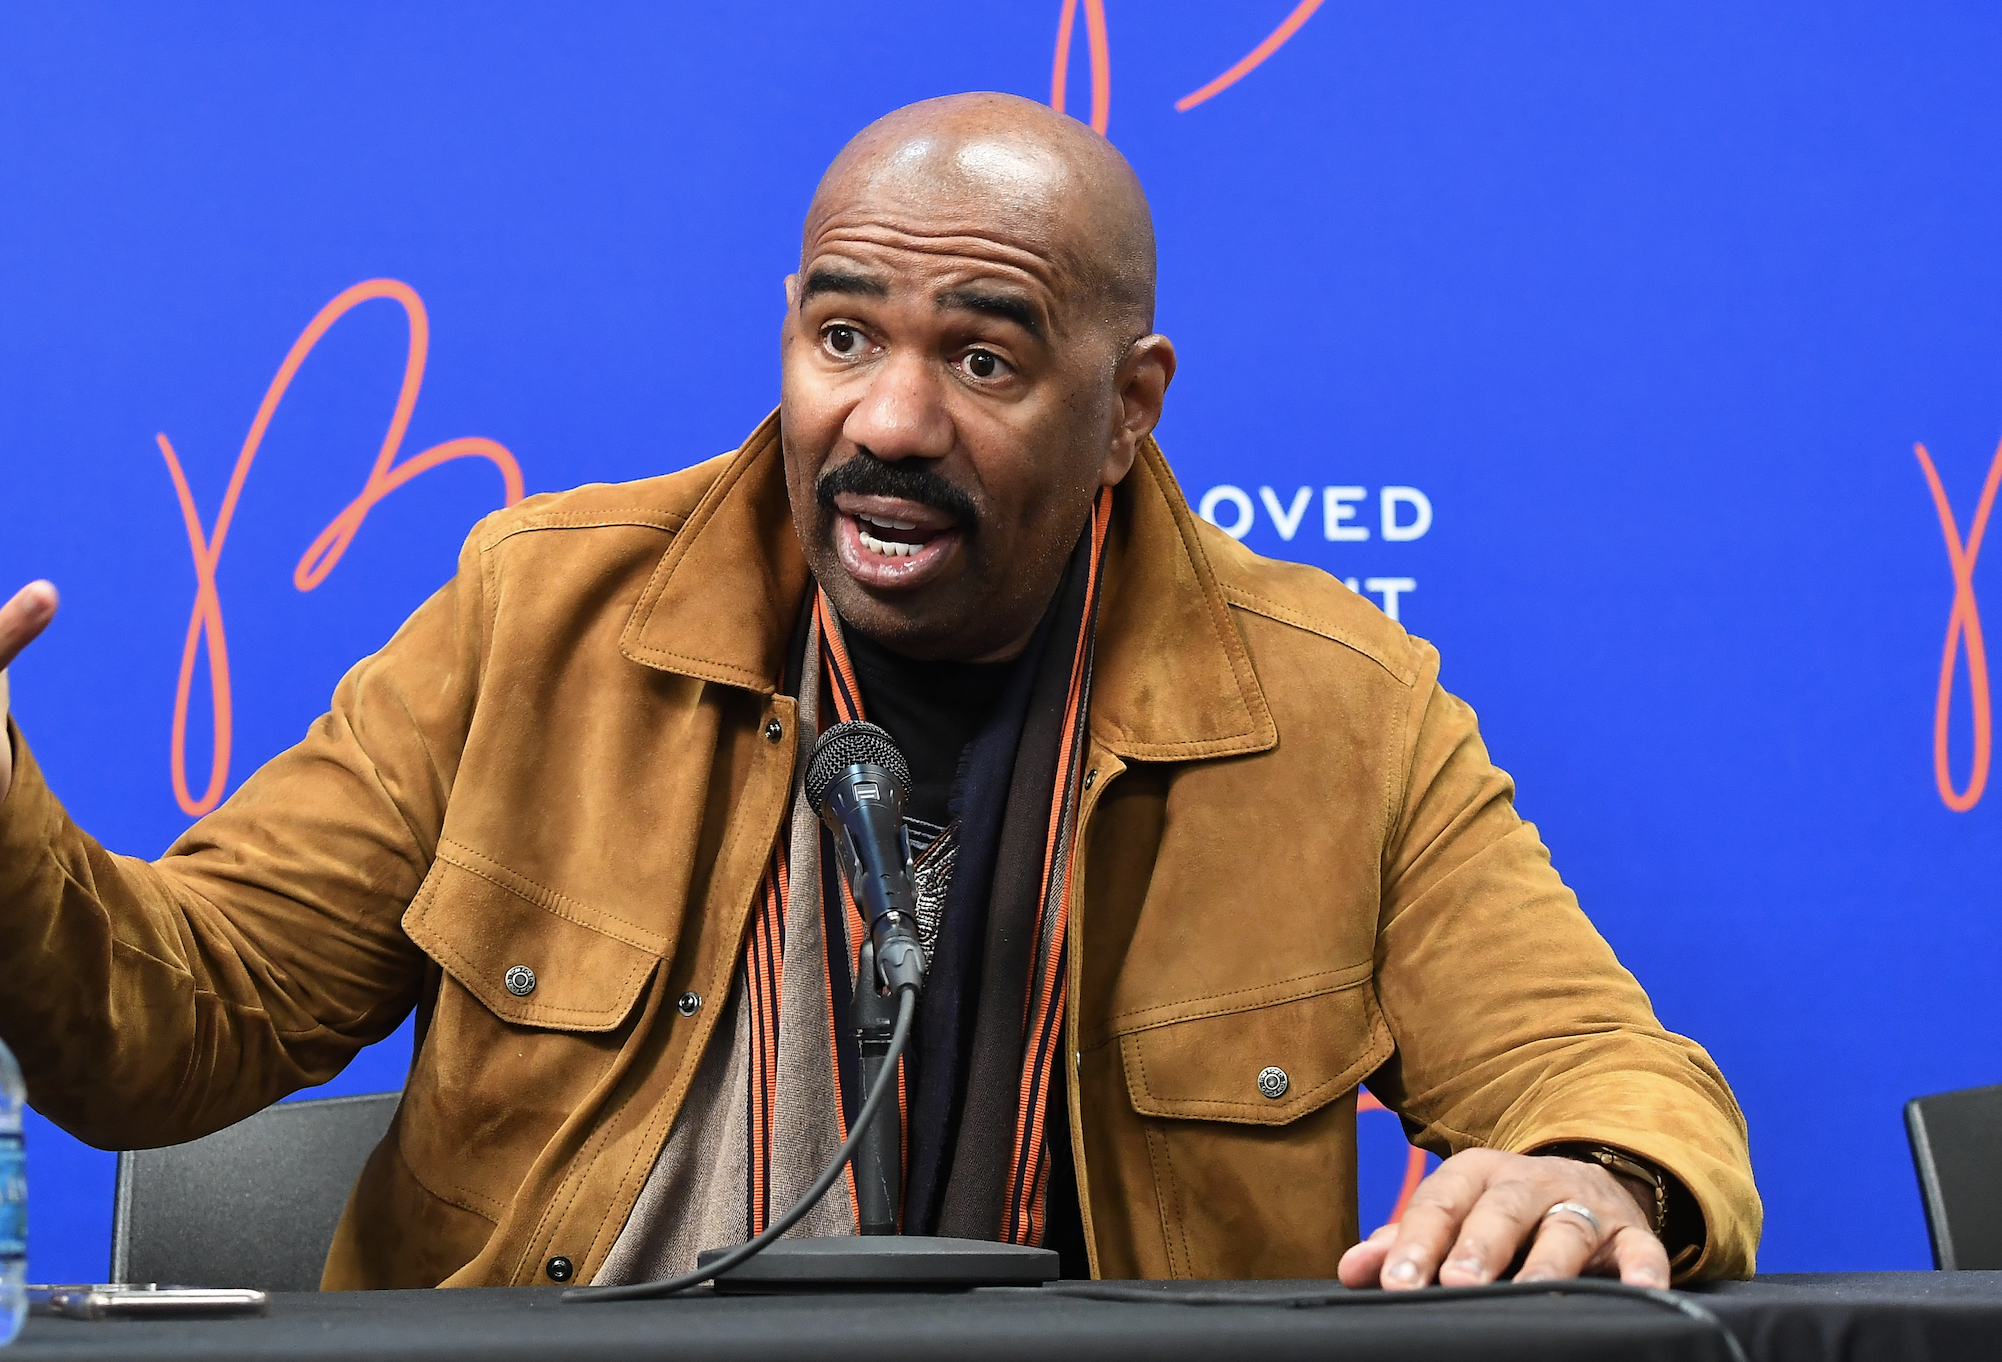 10 Times Marjorie And Steve Harvey Complemented Each Other In